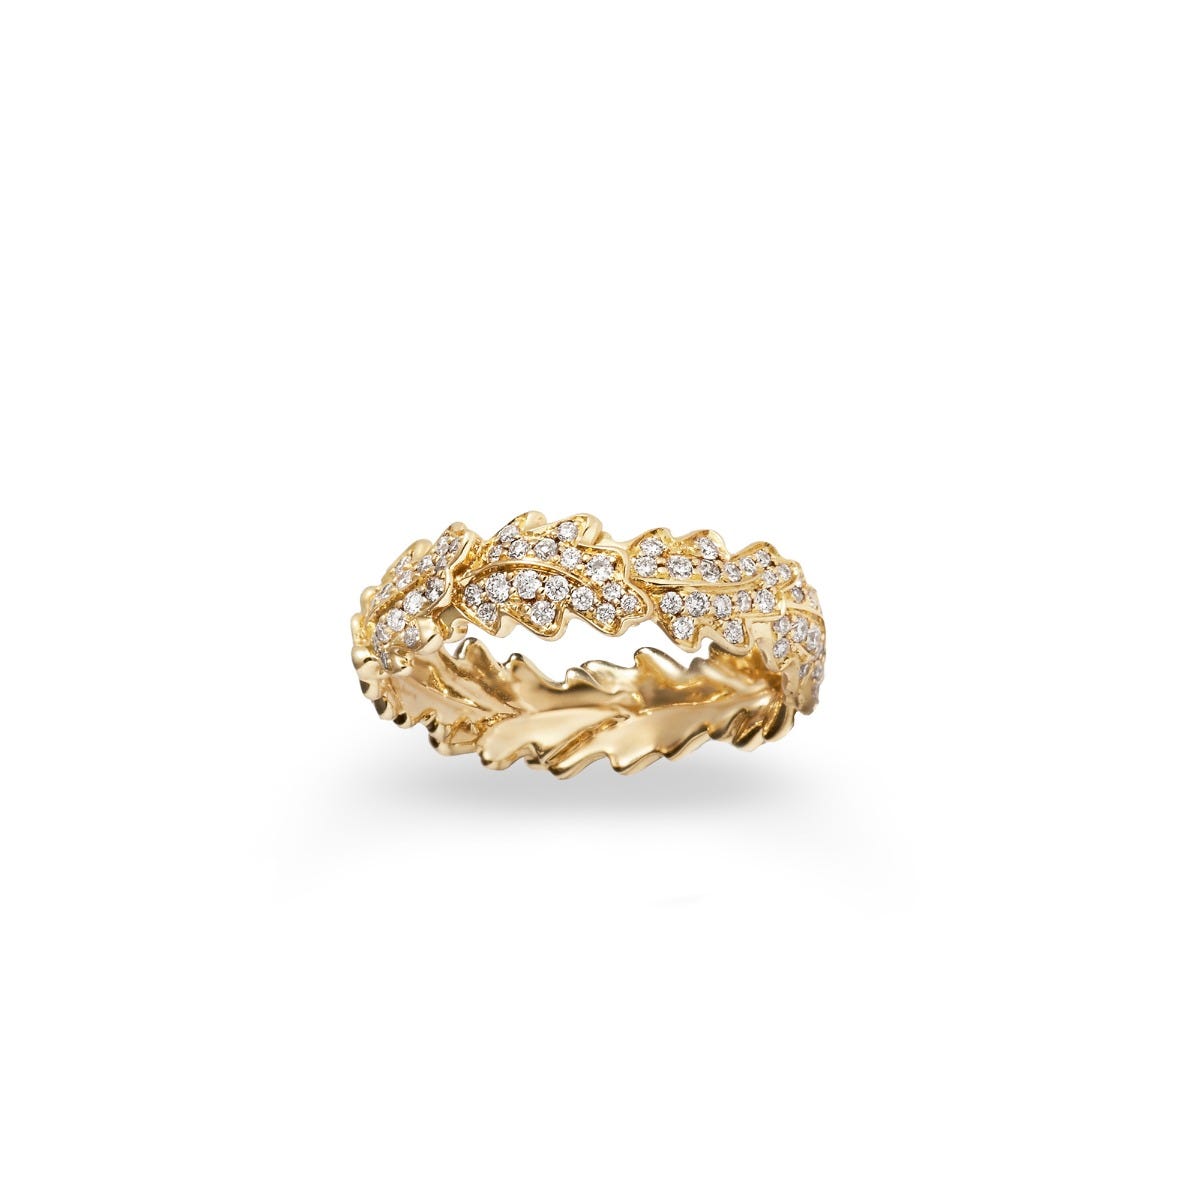 Woodland Oak Leaf Ring in 18ct Yellow Gold with Diamonds